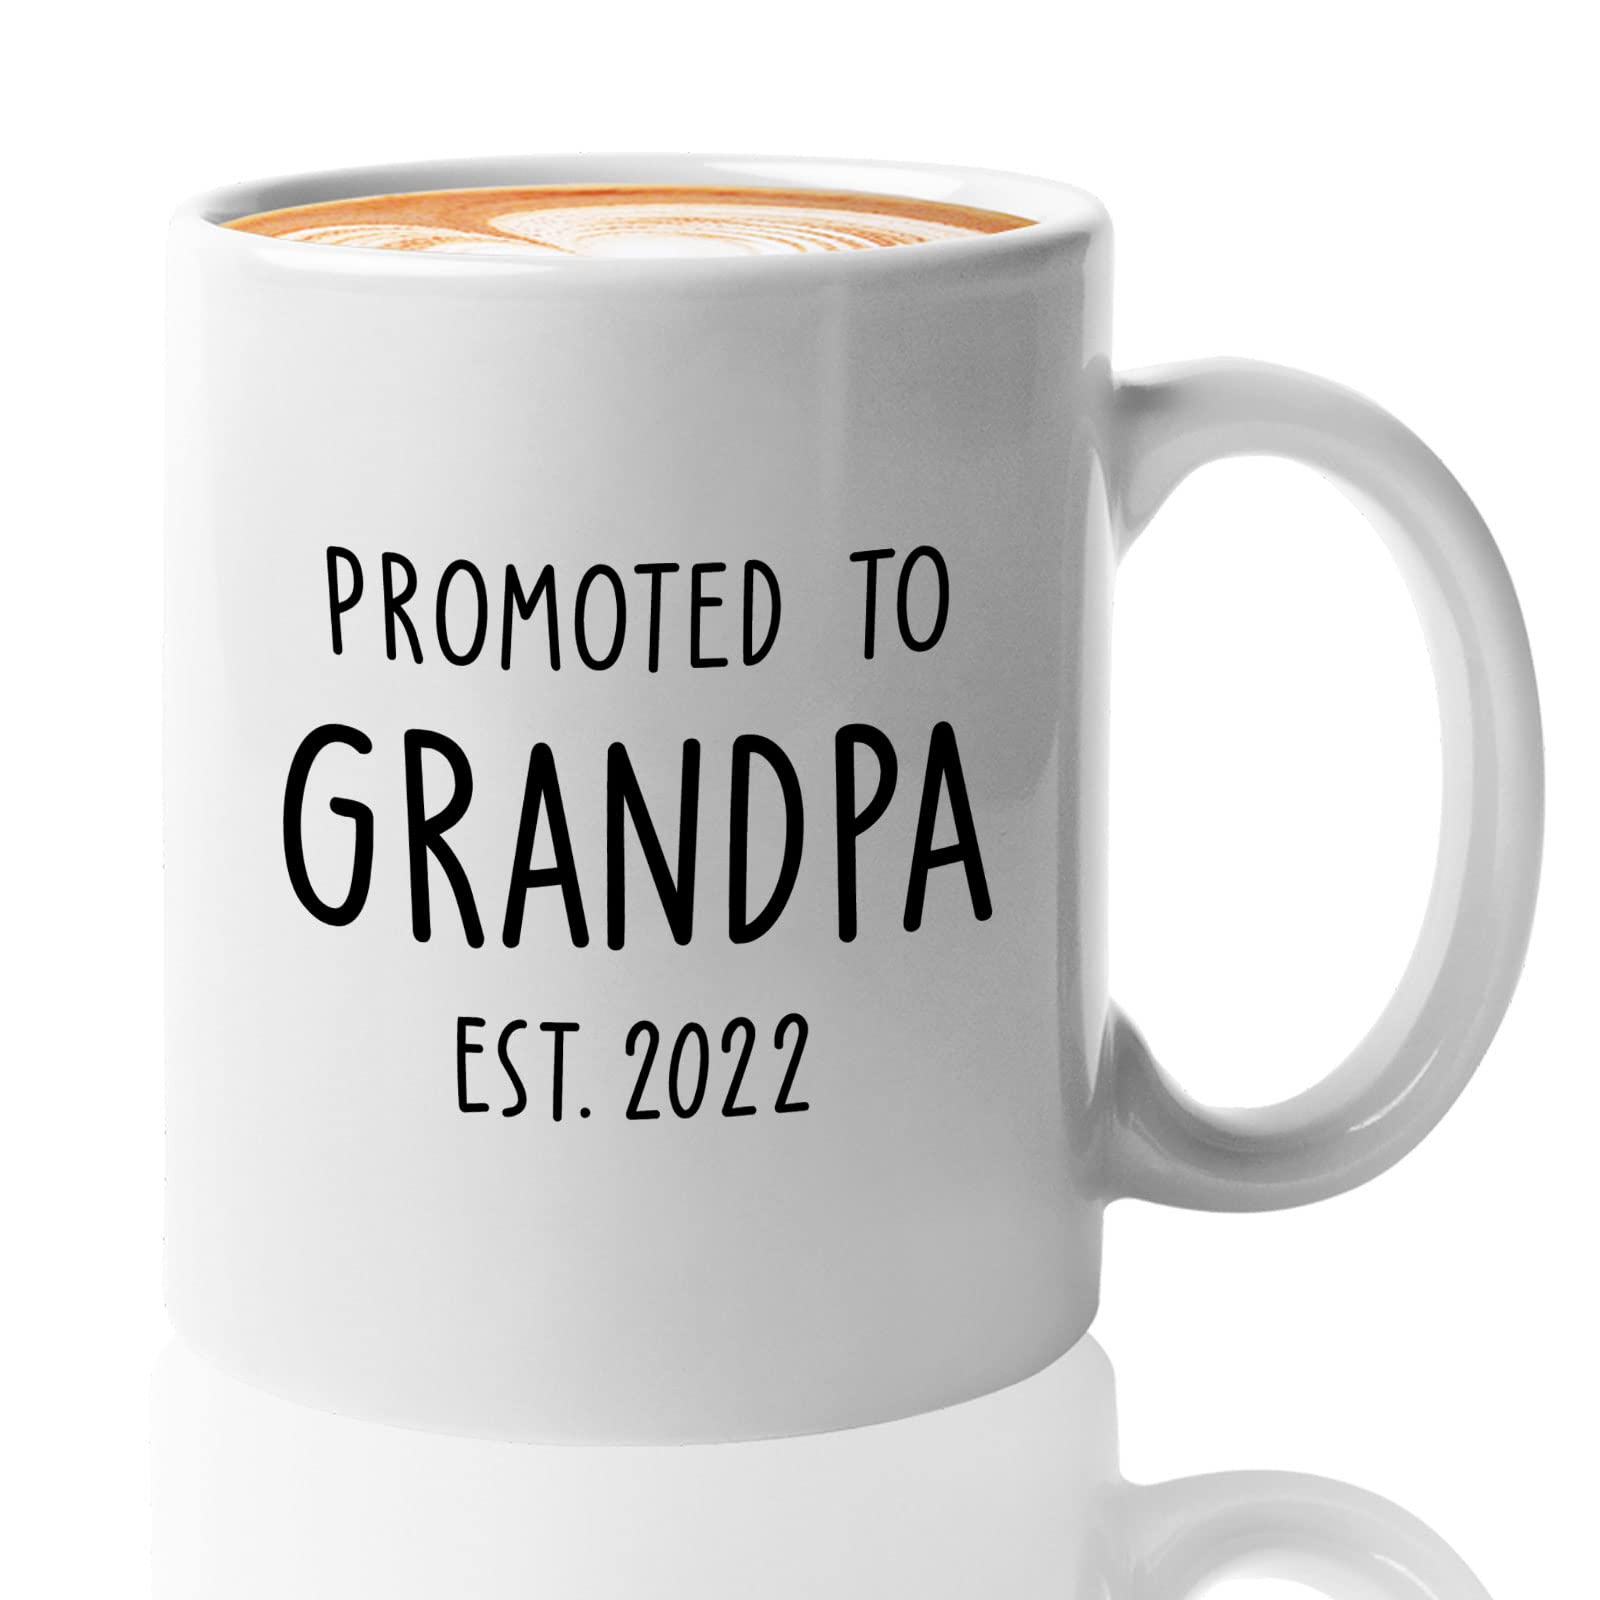 Bubble Hugs Family Coffee Mug 11oz White - Promoted To Grandpa - Grandparents Expecting A Baby Birth Gender Announcement Pregnancy Baby Shower Grandchild